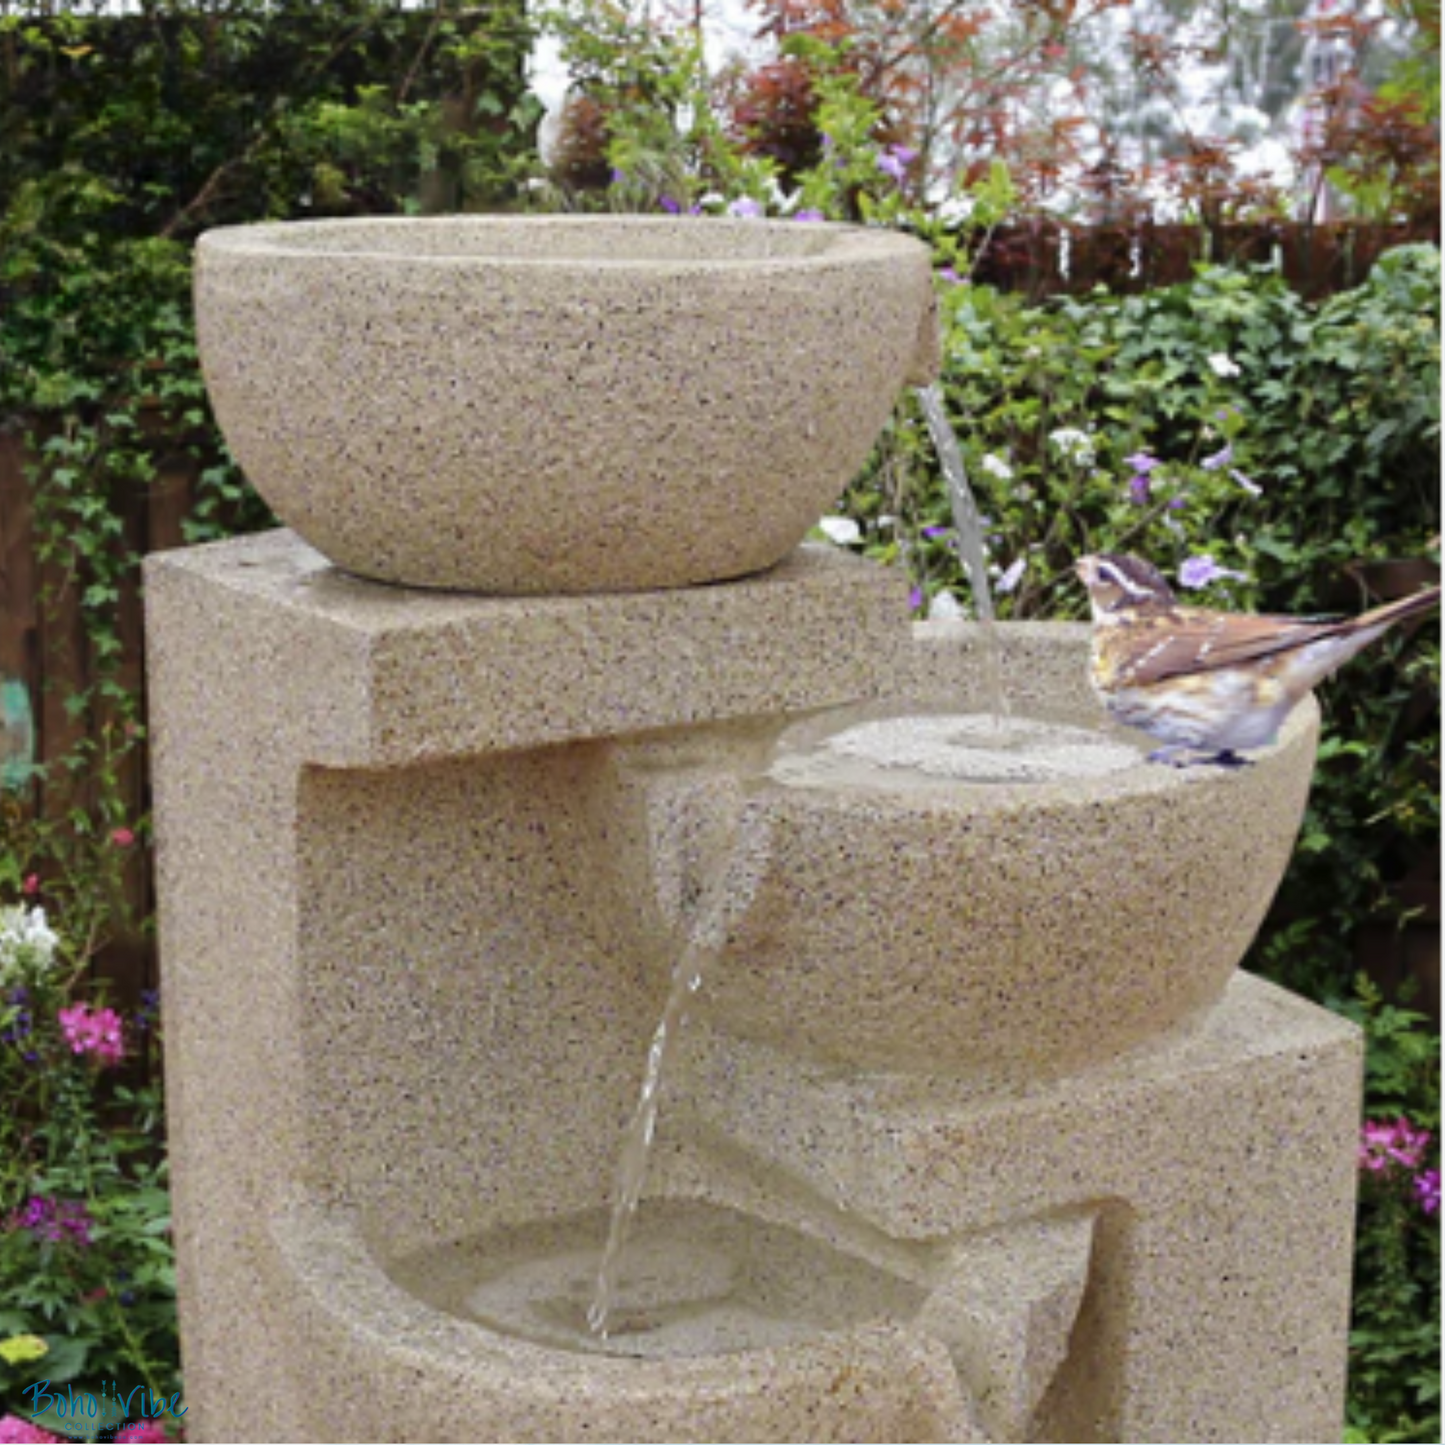 Boho ↡↟ Vibe Collection ↠ Water Fountain Outdoor Solar Power Water Feature Sand Colour 4 Bowls and LED Lights 